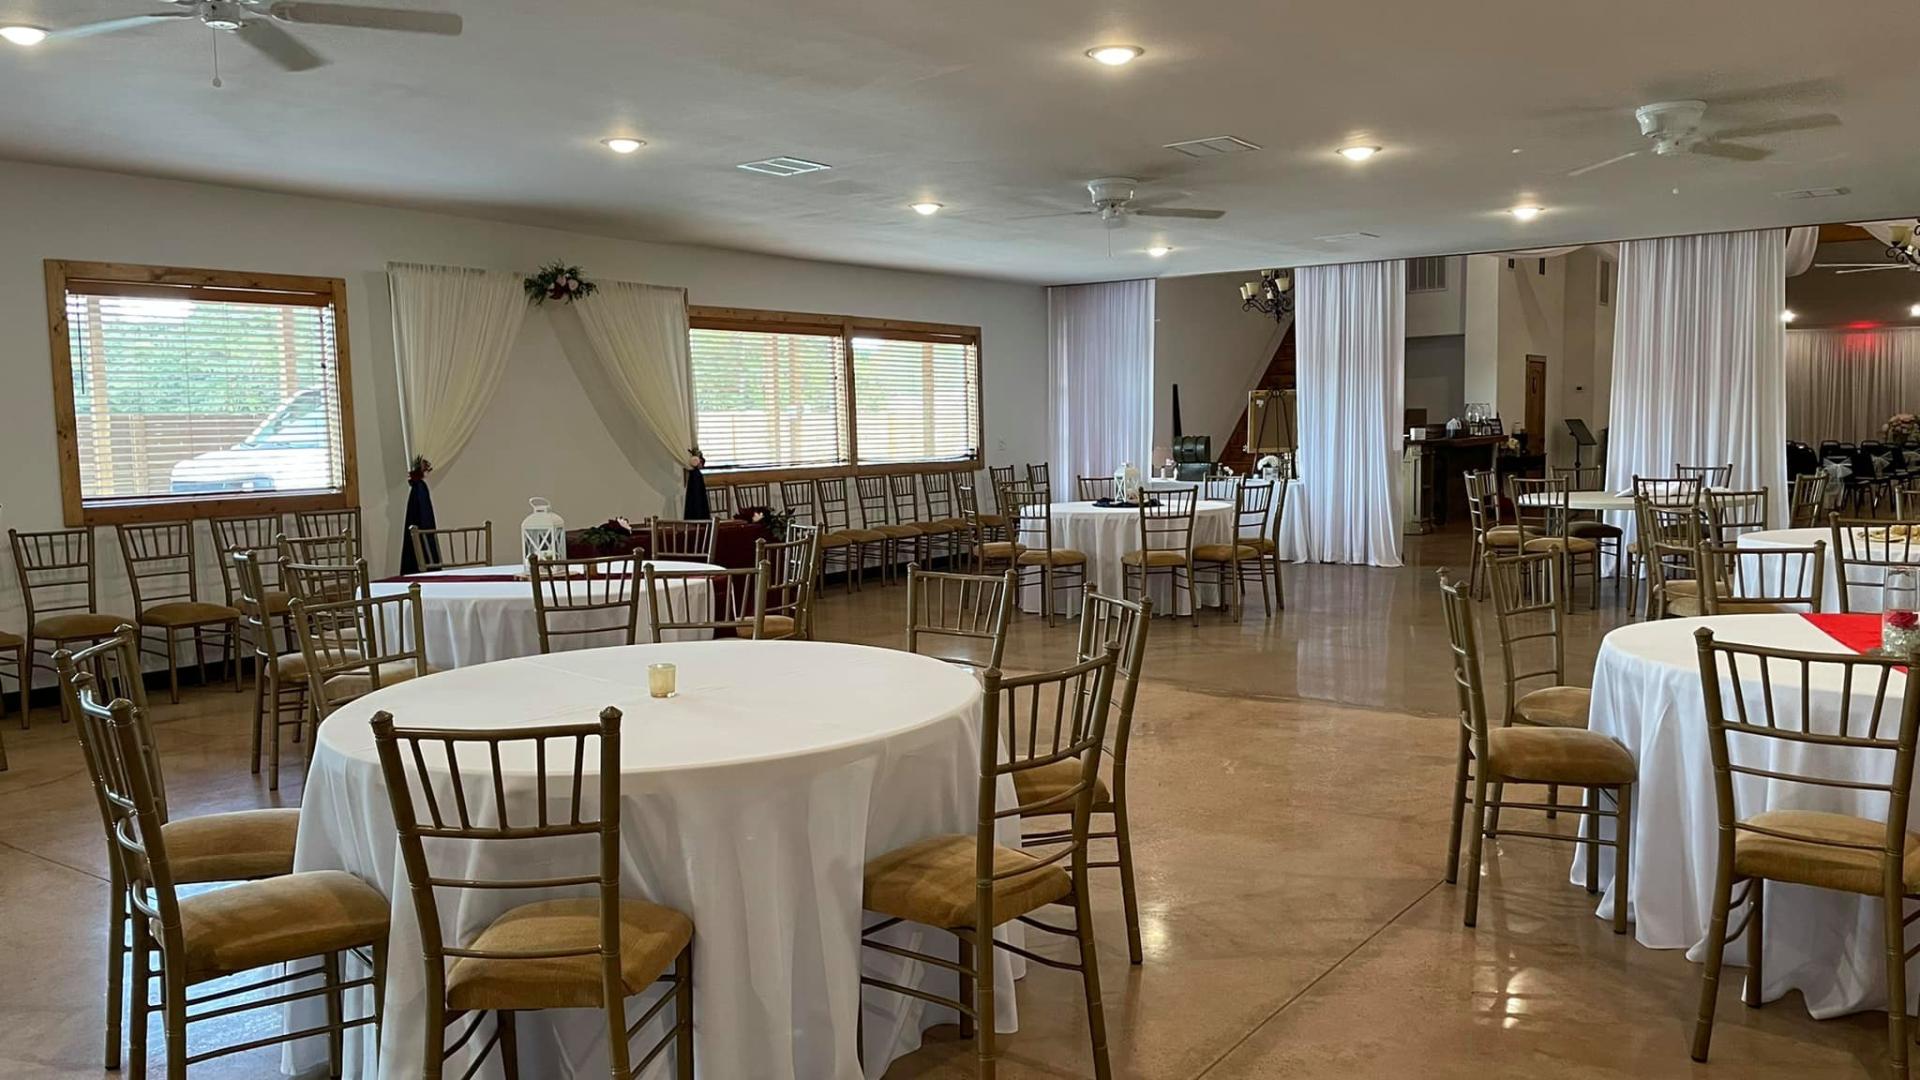 Christening Party Venues for Rent in Houston, TX